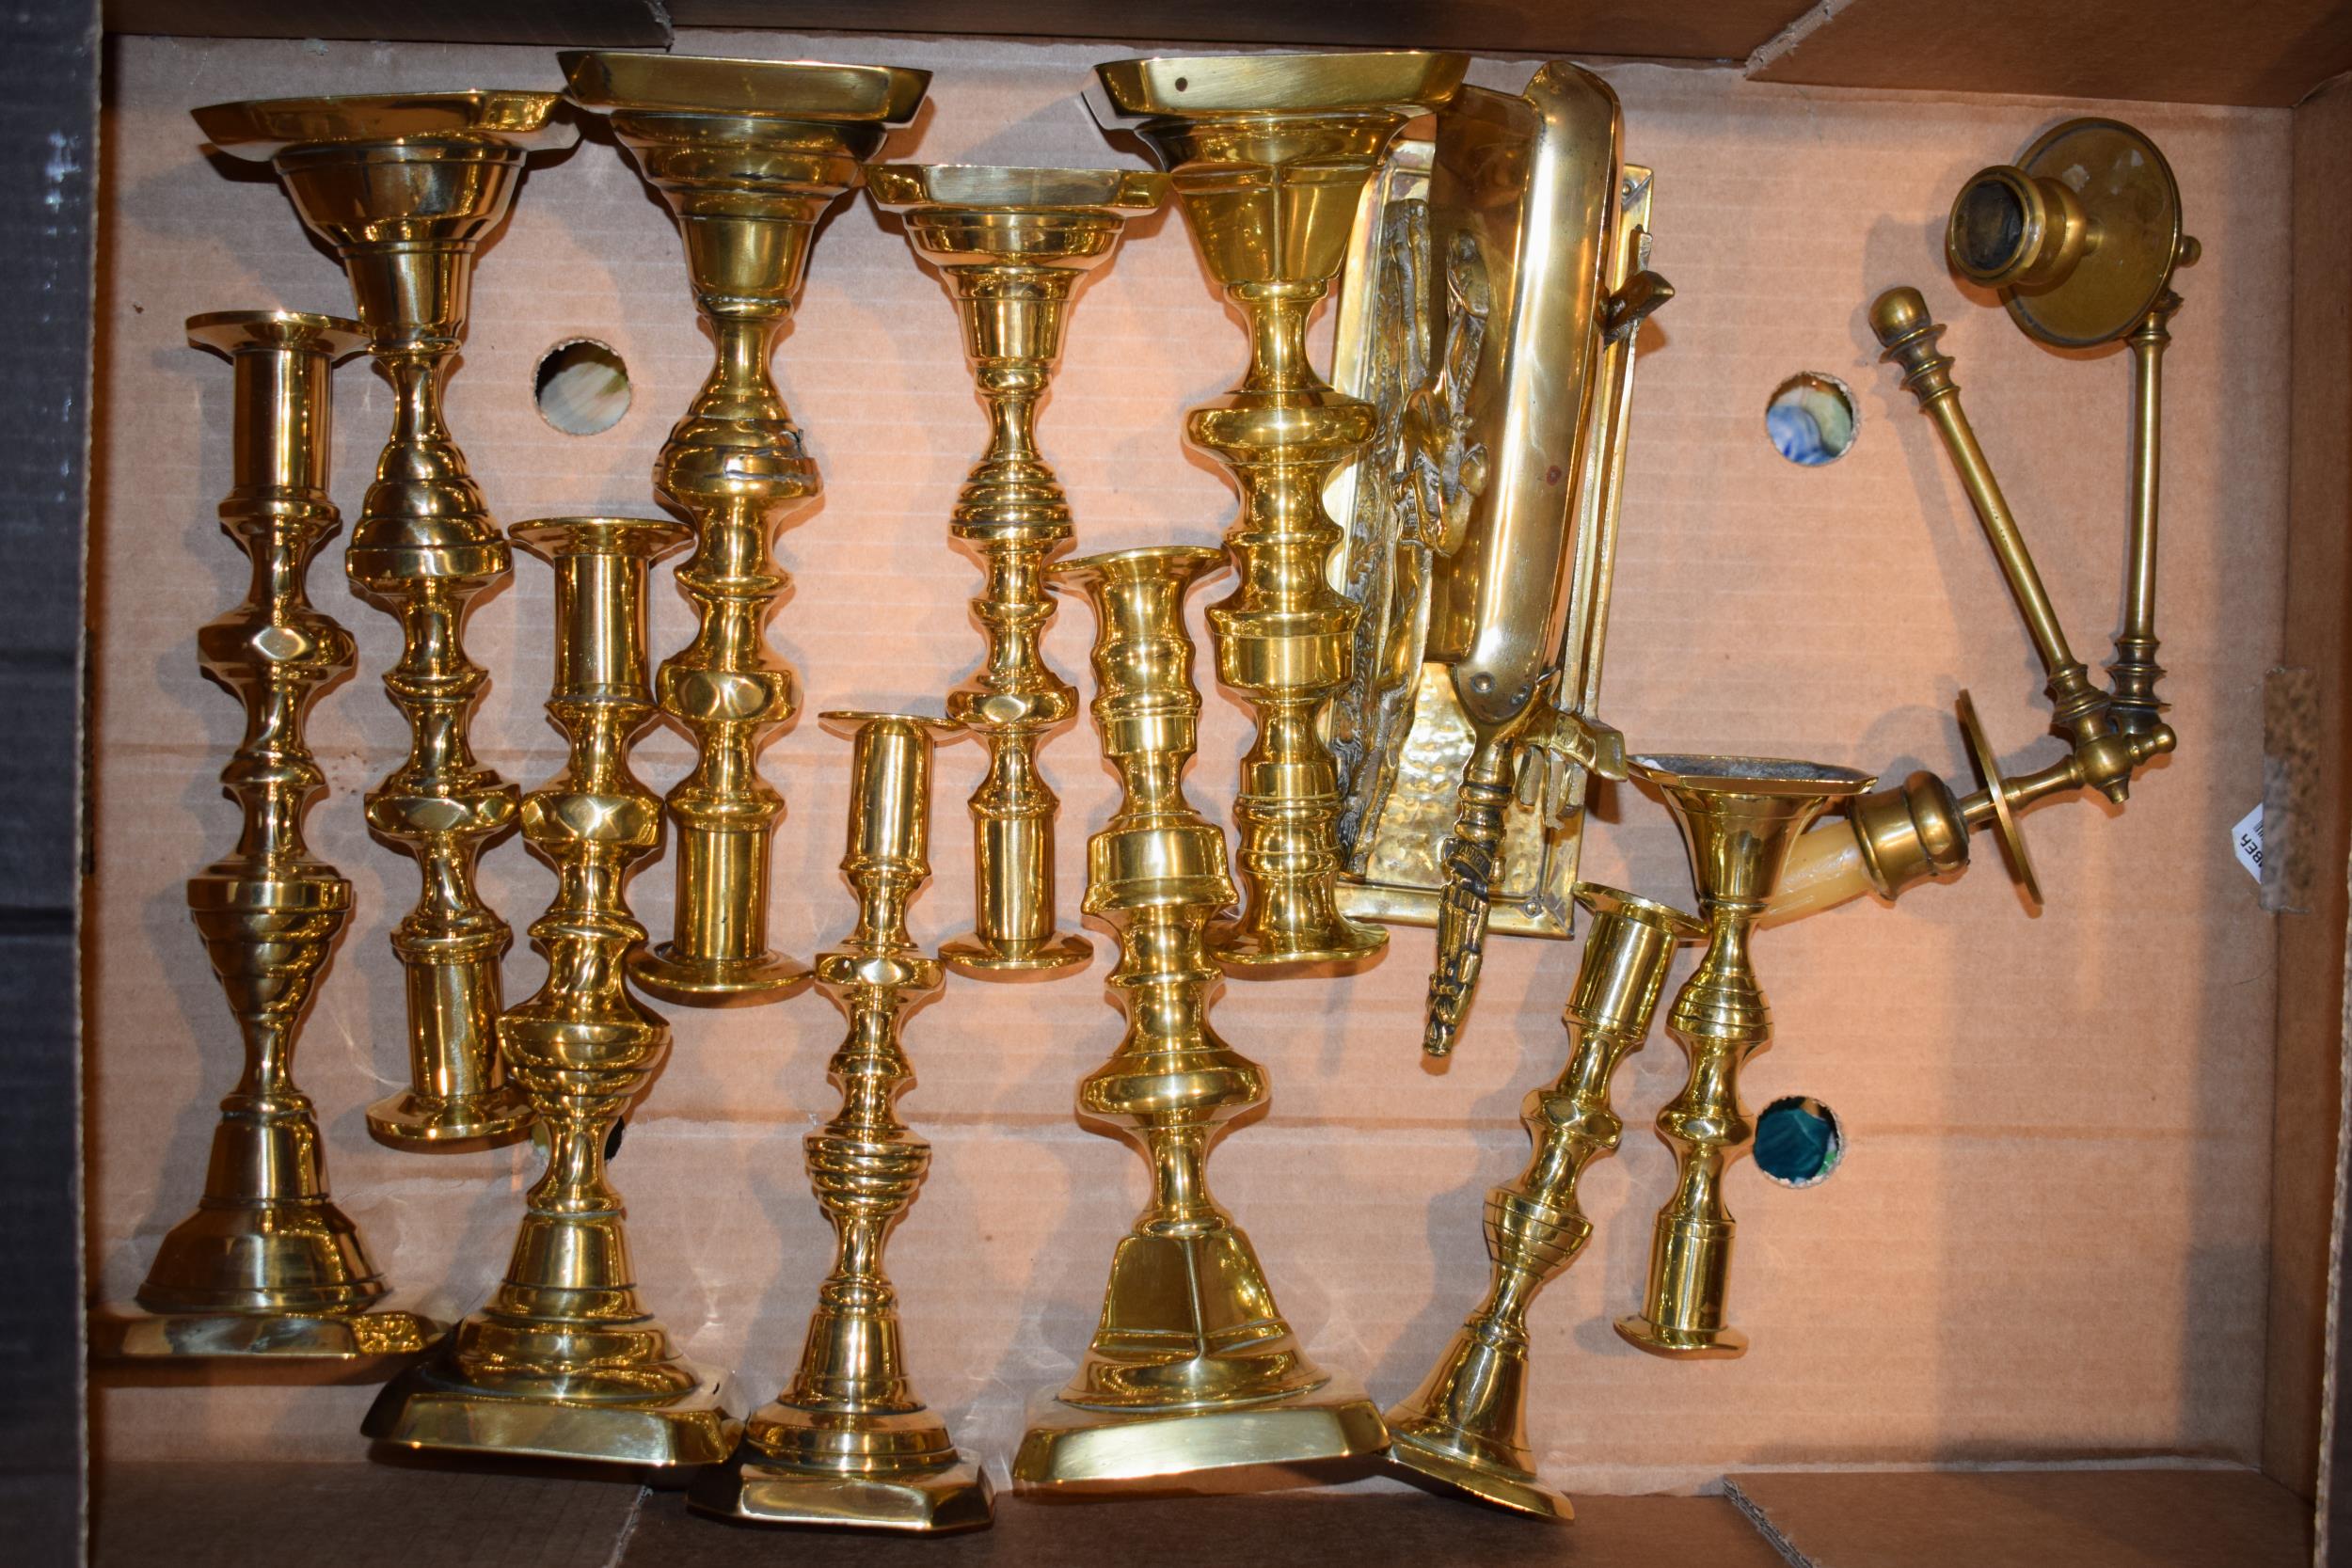 A collection of antique brass candle sticks together with other similar vintage brass items, in